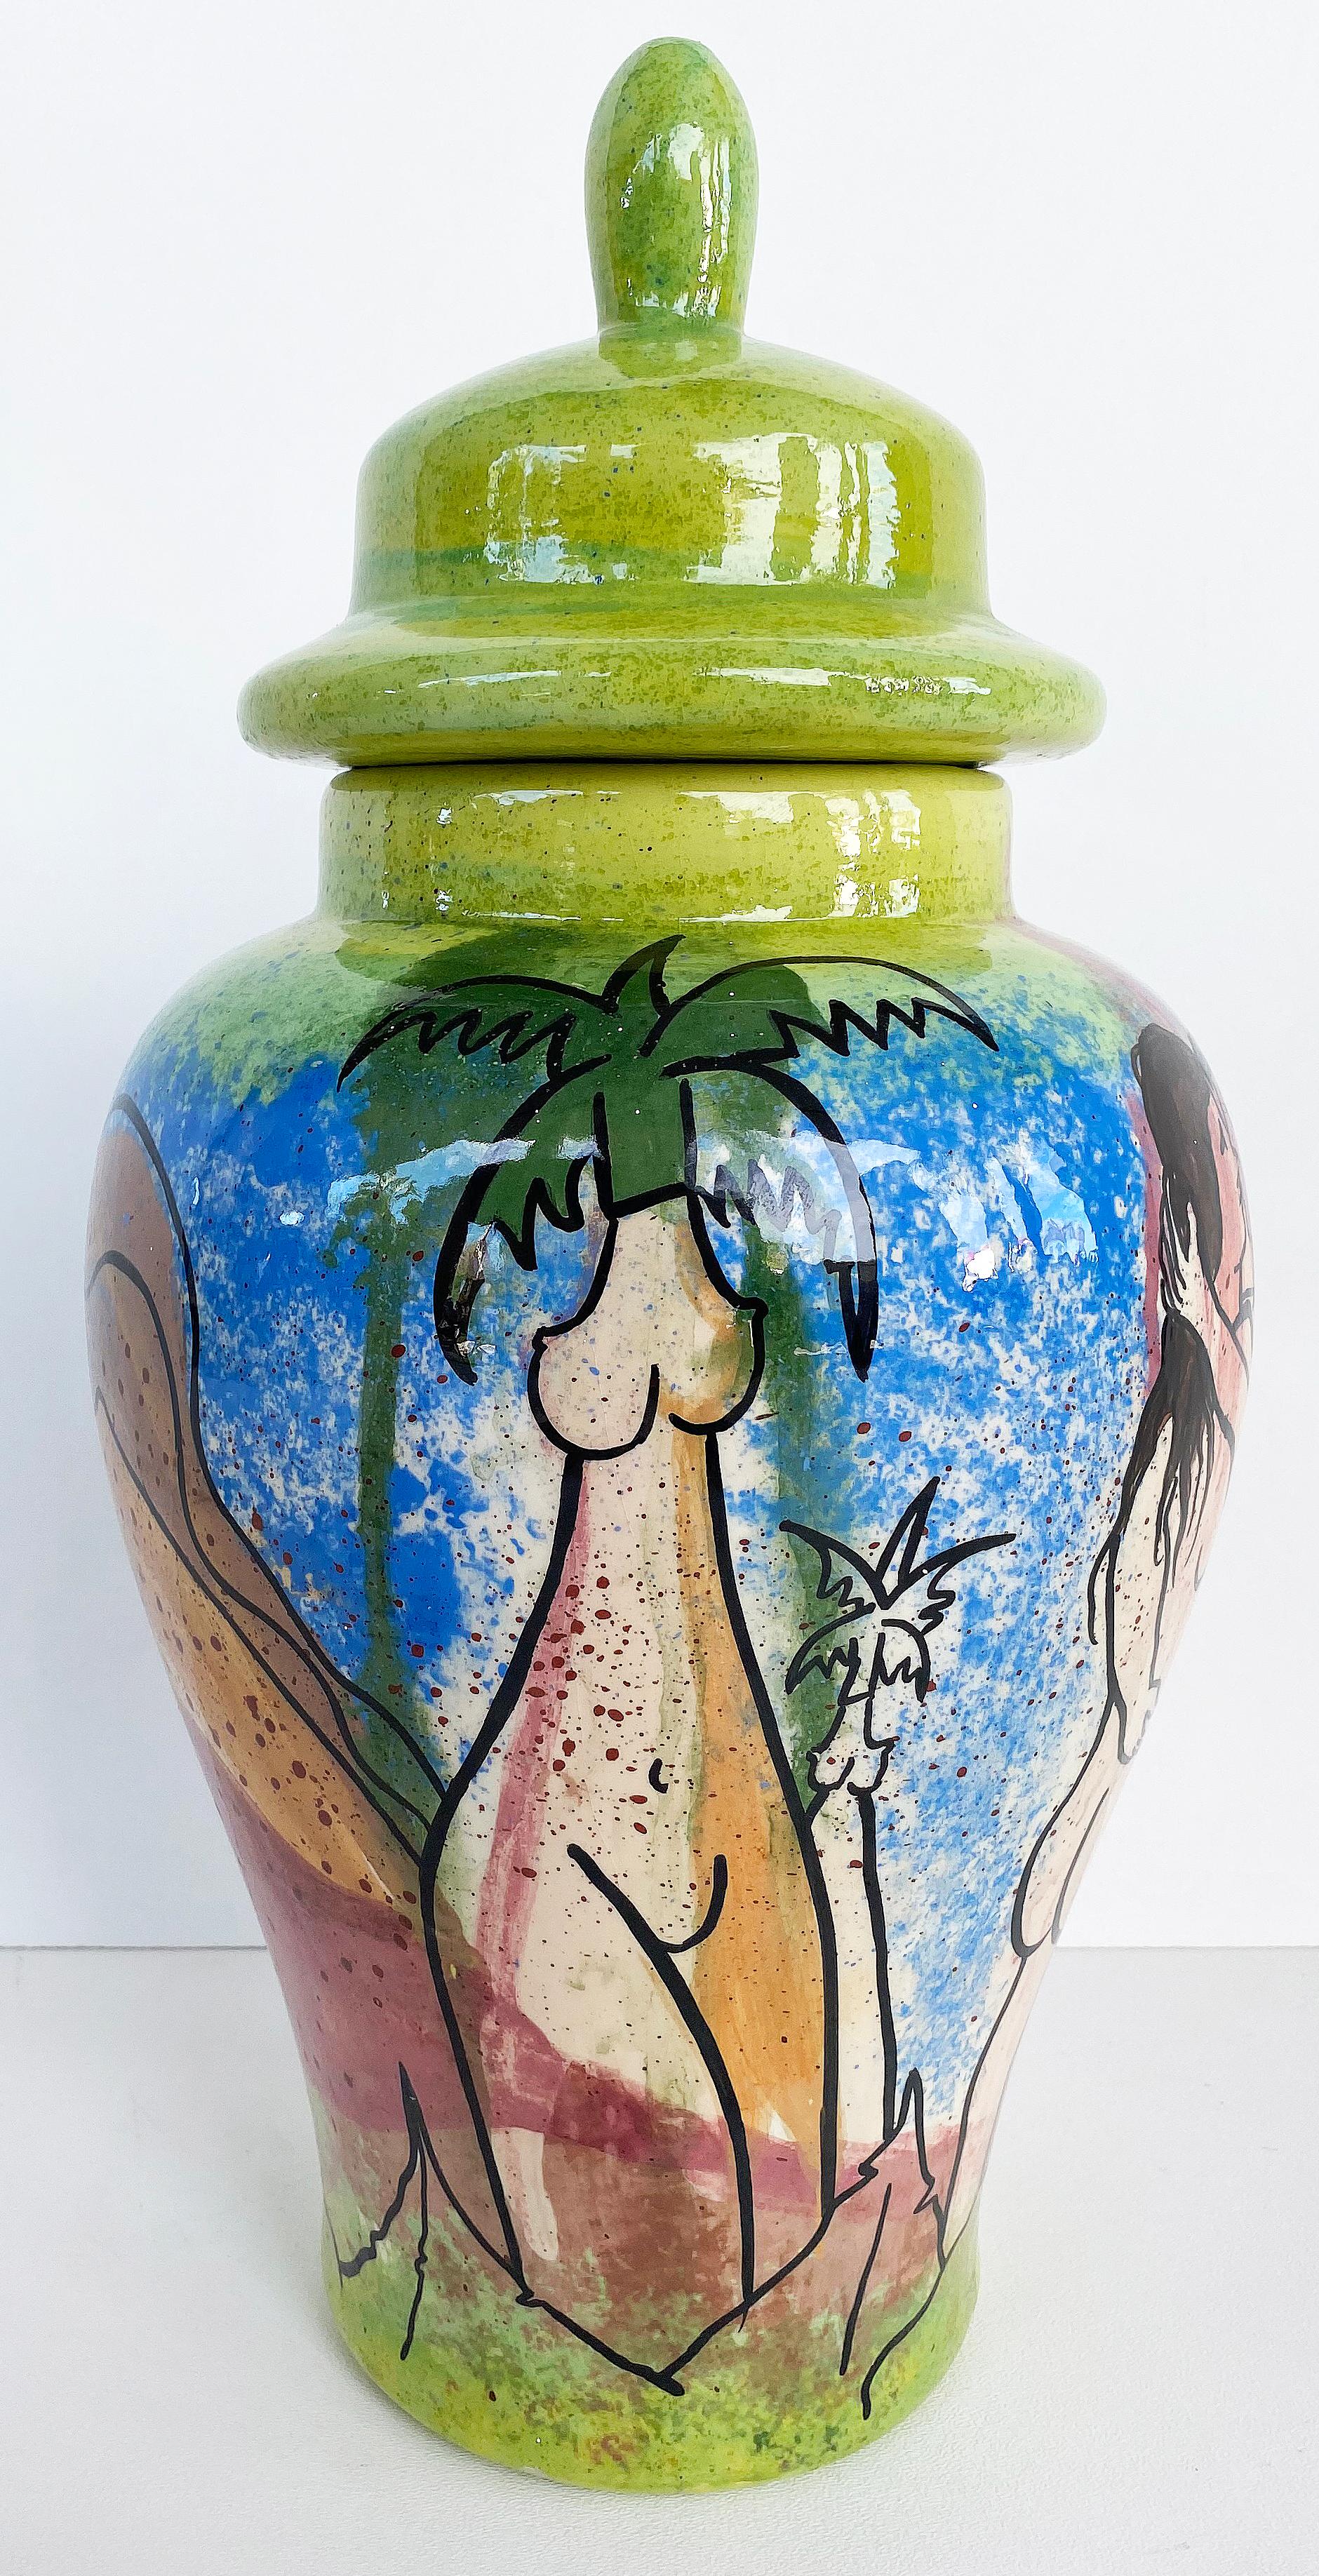 Juan Navarette Ceramic hand-painted lidded urn, Cuban American Art

Offered for sale is a hand-painted ceramic covered vessel by the renowned Cuban-American artist Juan Navarette. The urn is decorated with nude figures and additional scenes